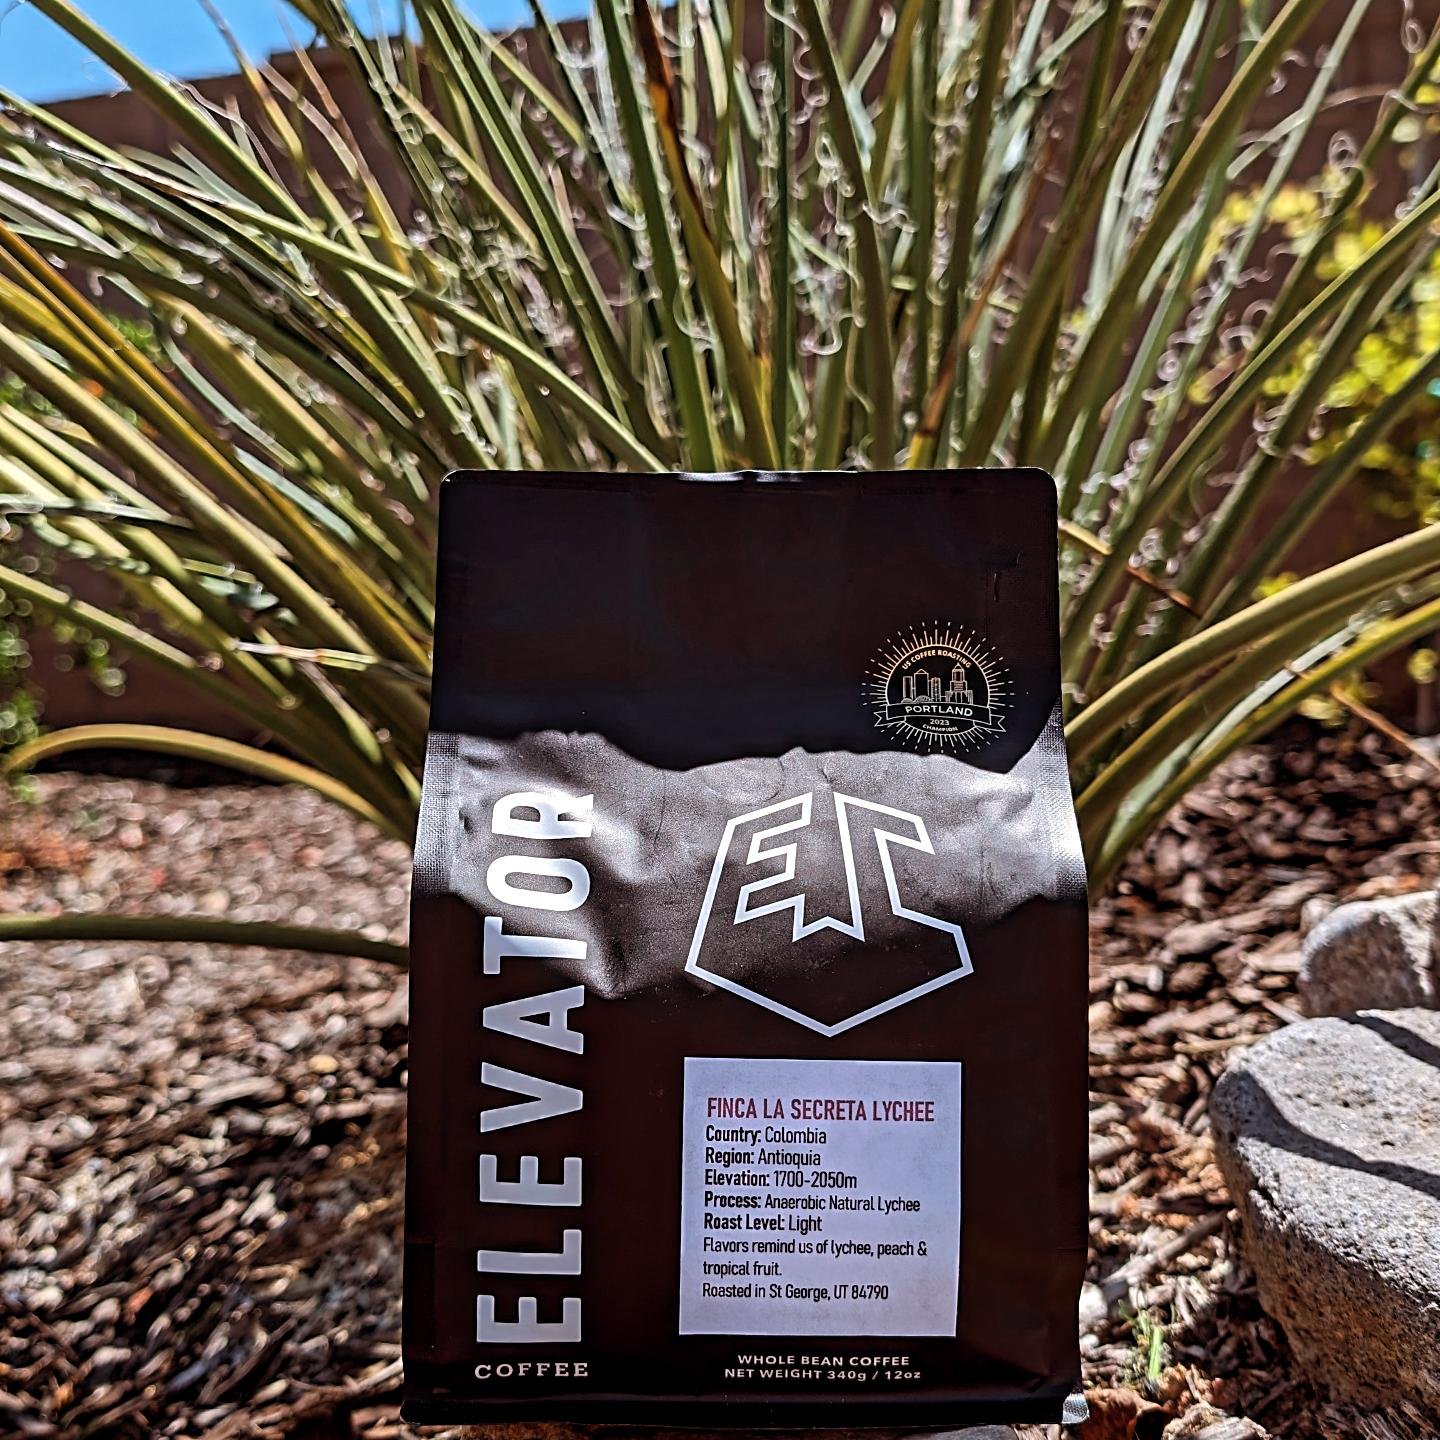 Excited to announce we are officially roasting coffee in St George, UT. 

About 1 year ago, @andrewcoecoffee relocated from PDX to St George. He has been working to expand our roasting program since then. Meanwhile, our PDX team has done a fantastic 